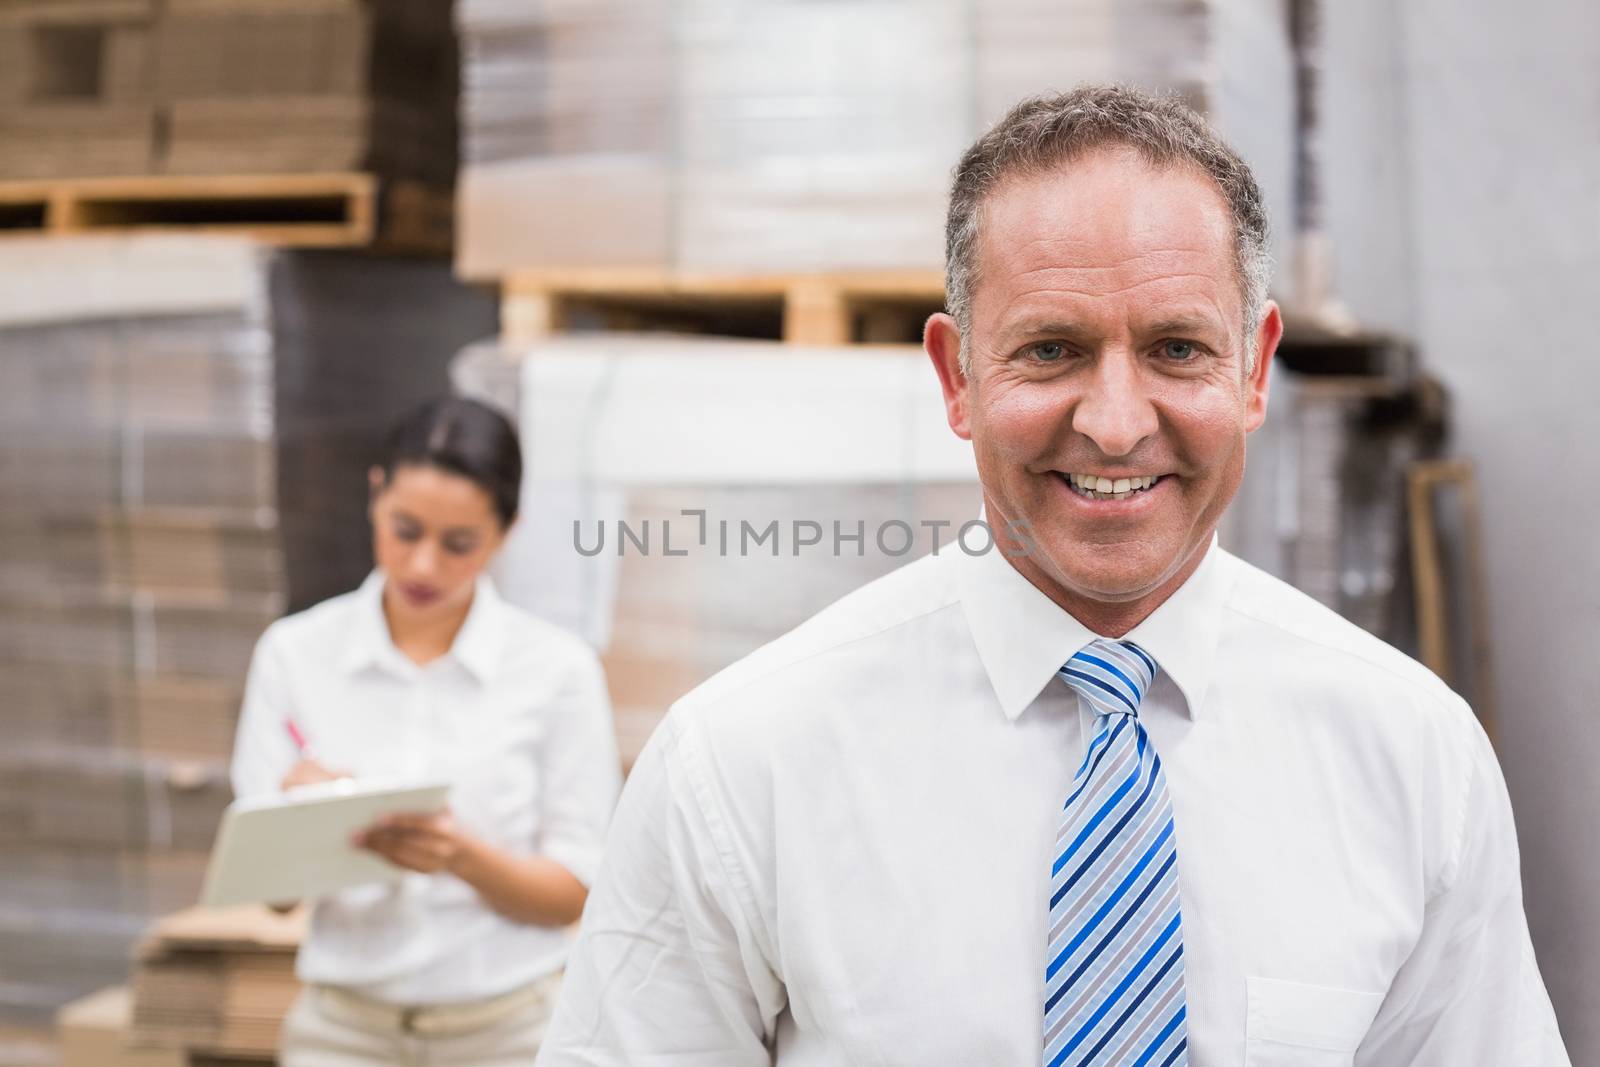 Warehouse manager smiling at camera by Wavebreakmedia